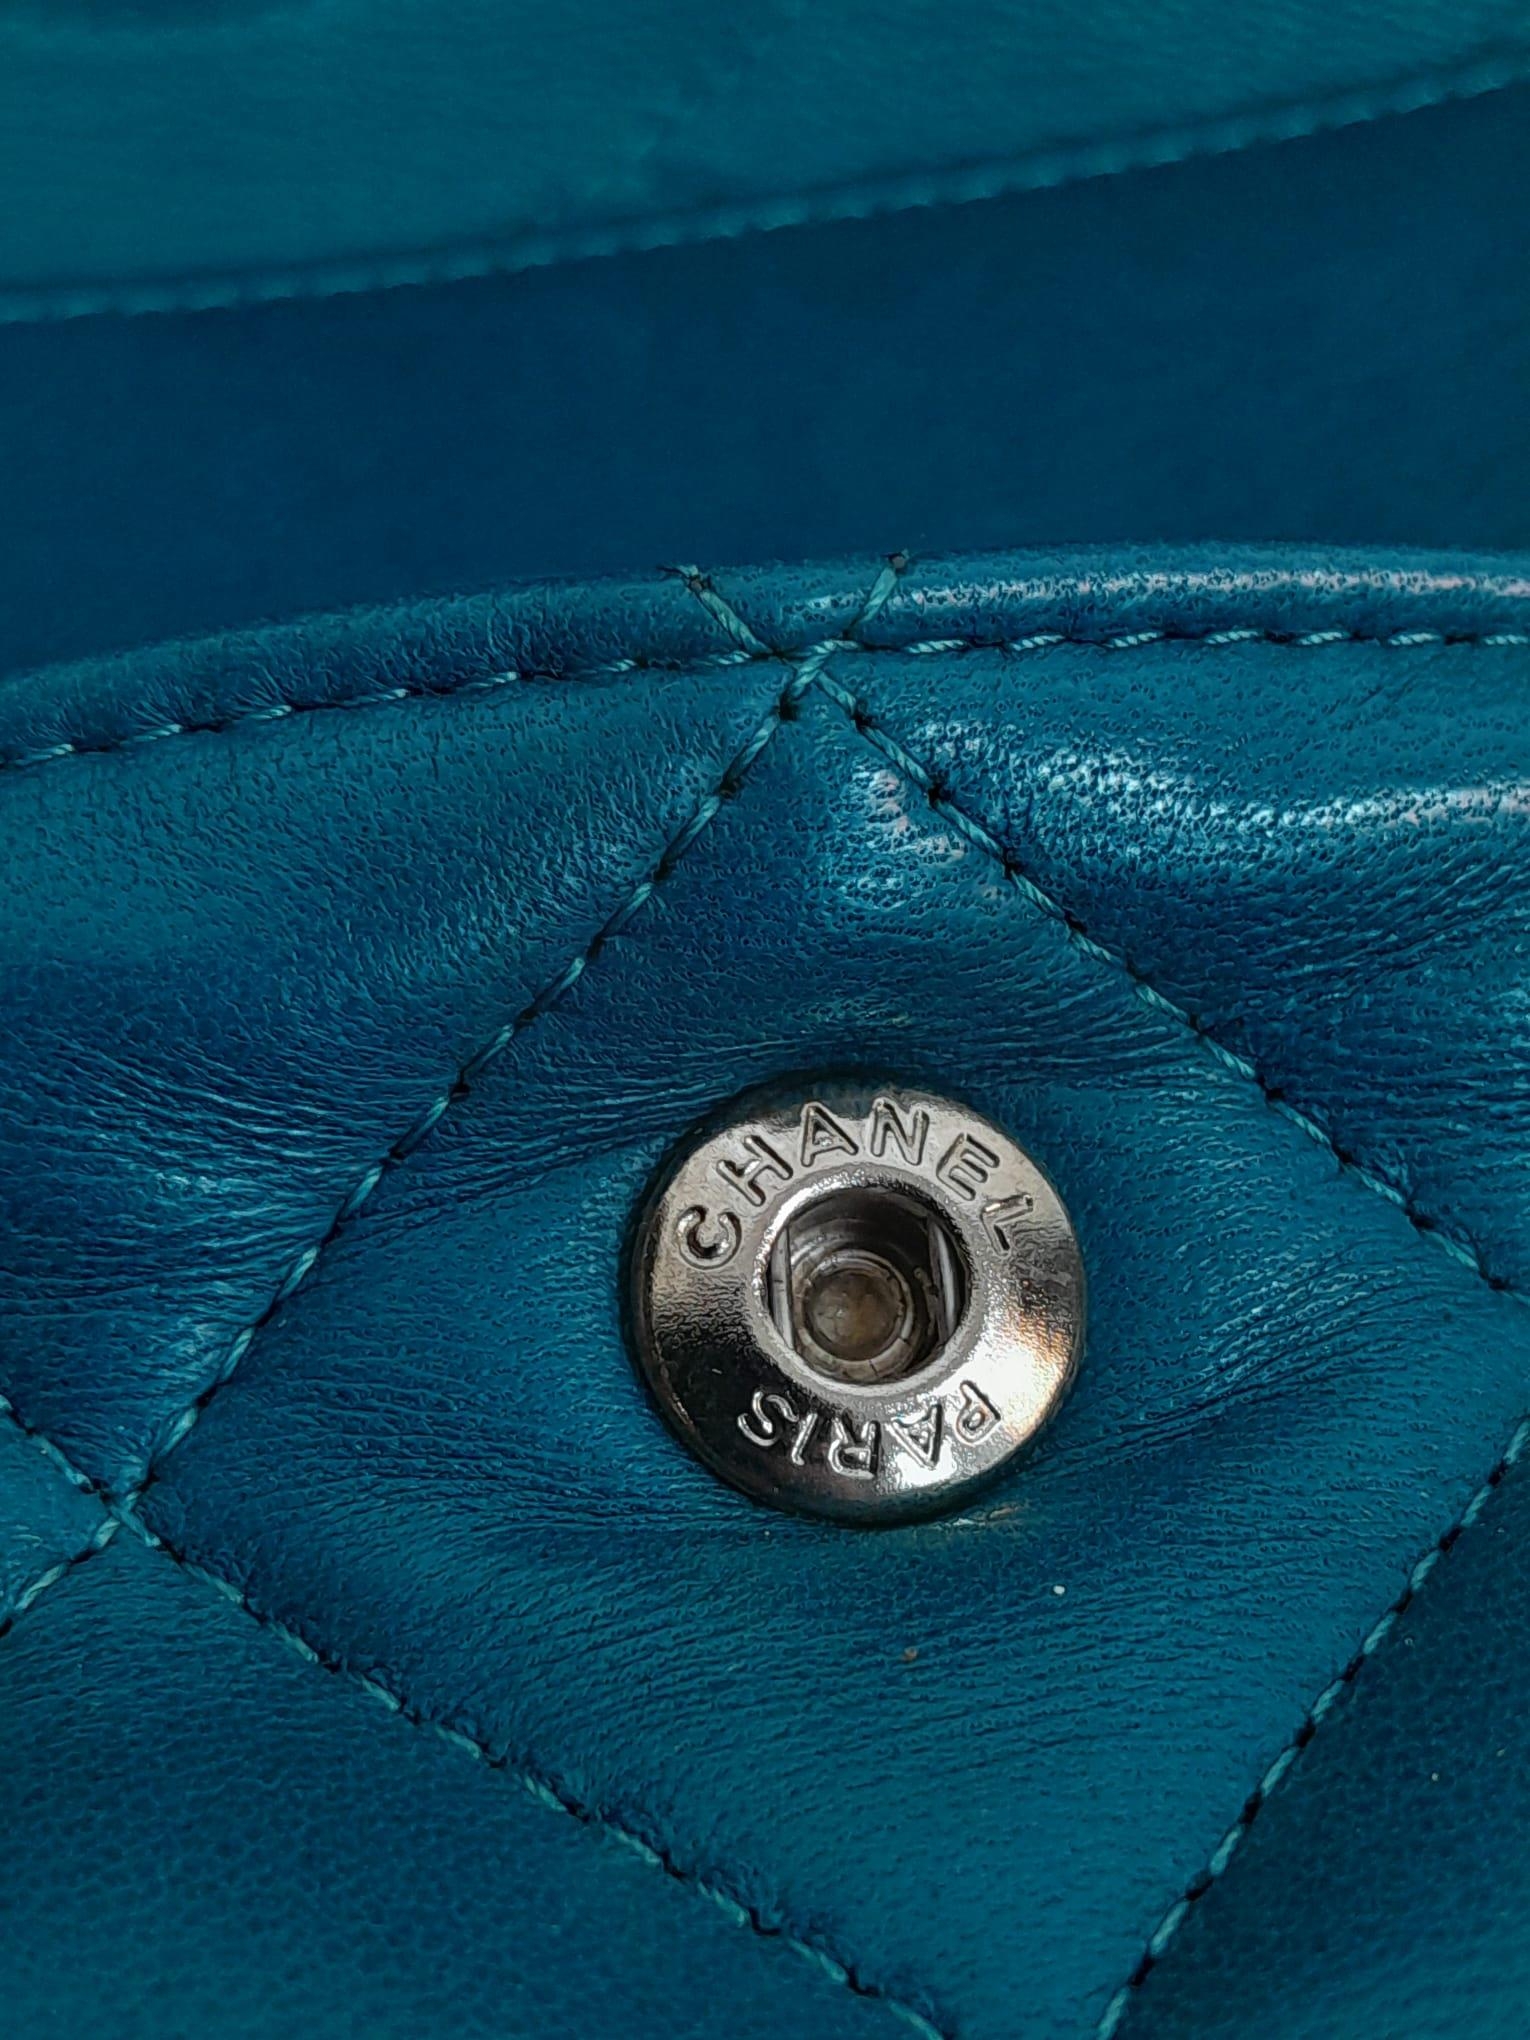 A Chanel Teal Jumbo Classic Double Flap Bag. Quilted leather exterior with silver-toned hardware, - Image 12 of 14